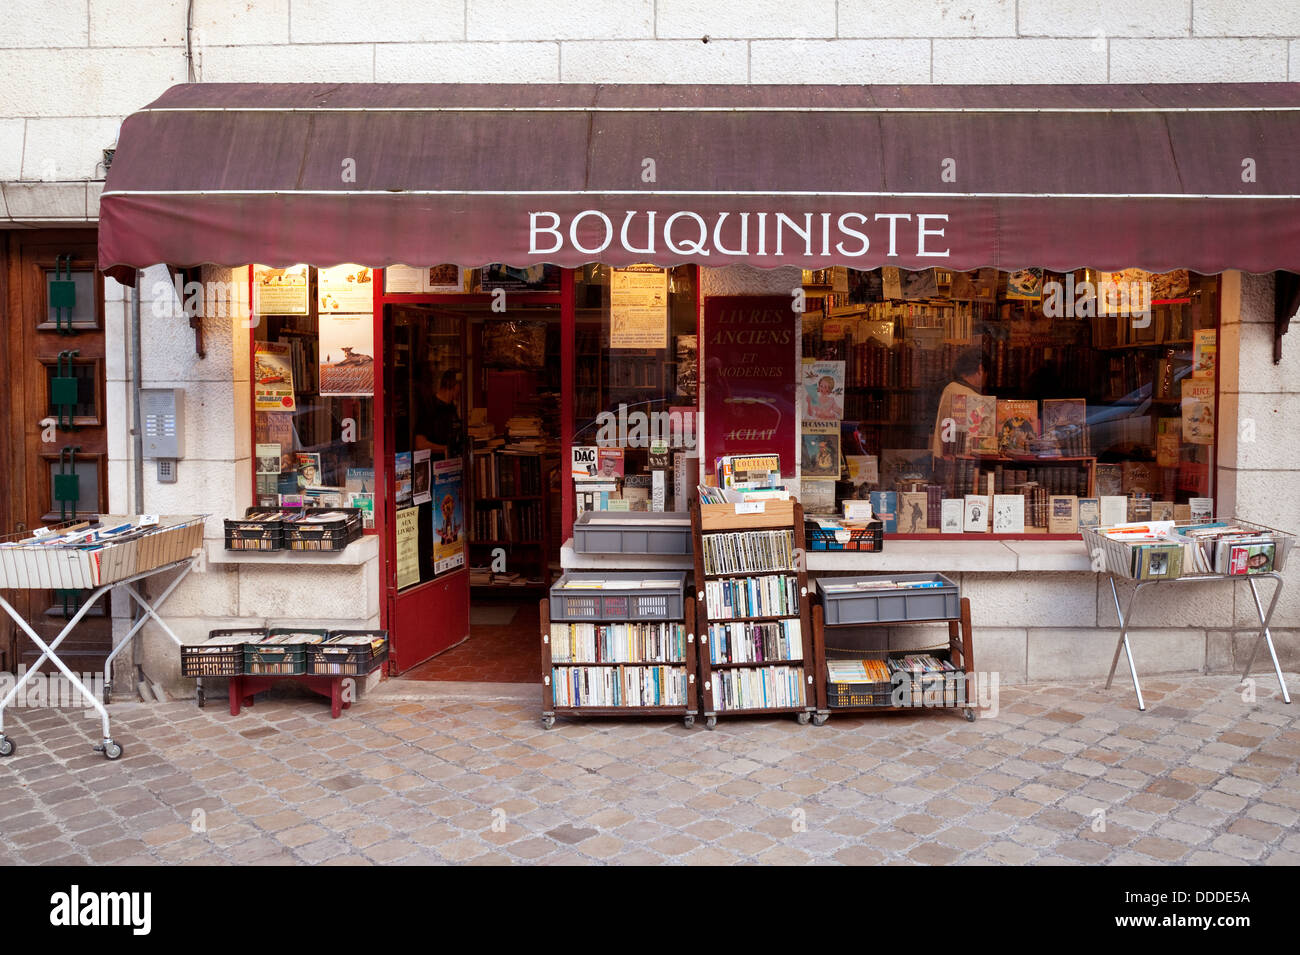 A second hand bookstore or Bouquiniste, Blois, Loire et Cher, France, Europe Stock Photo